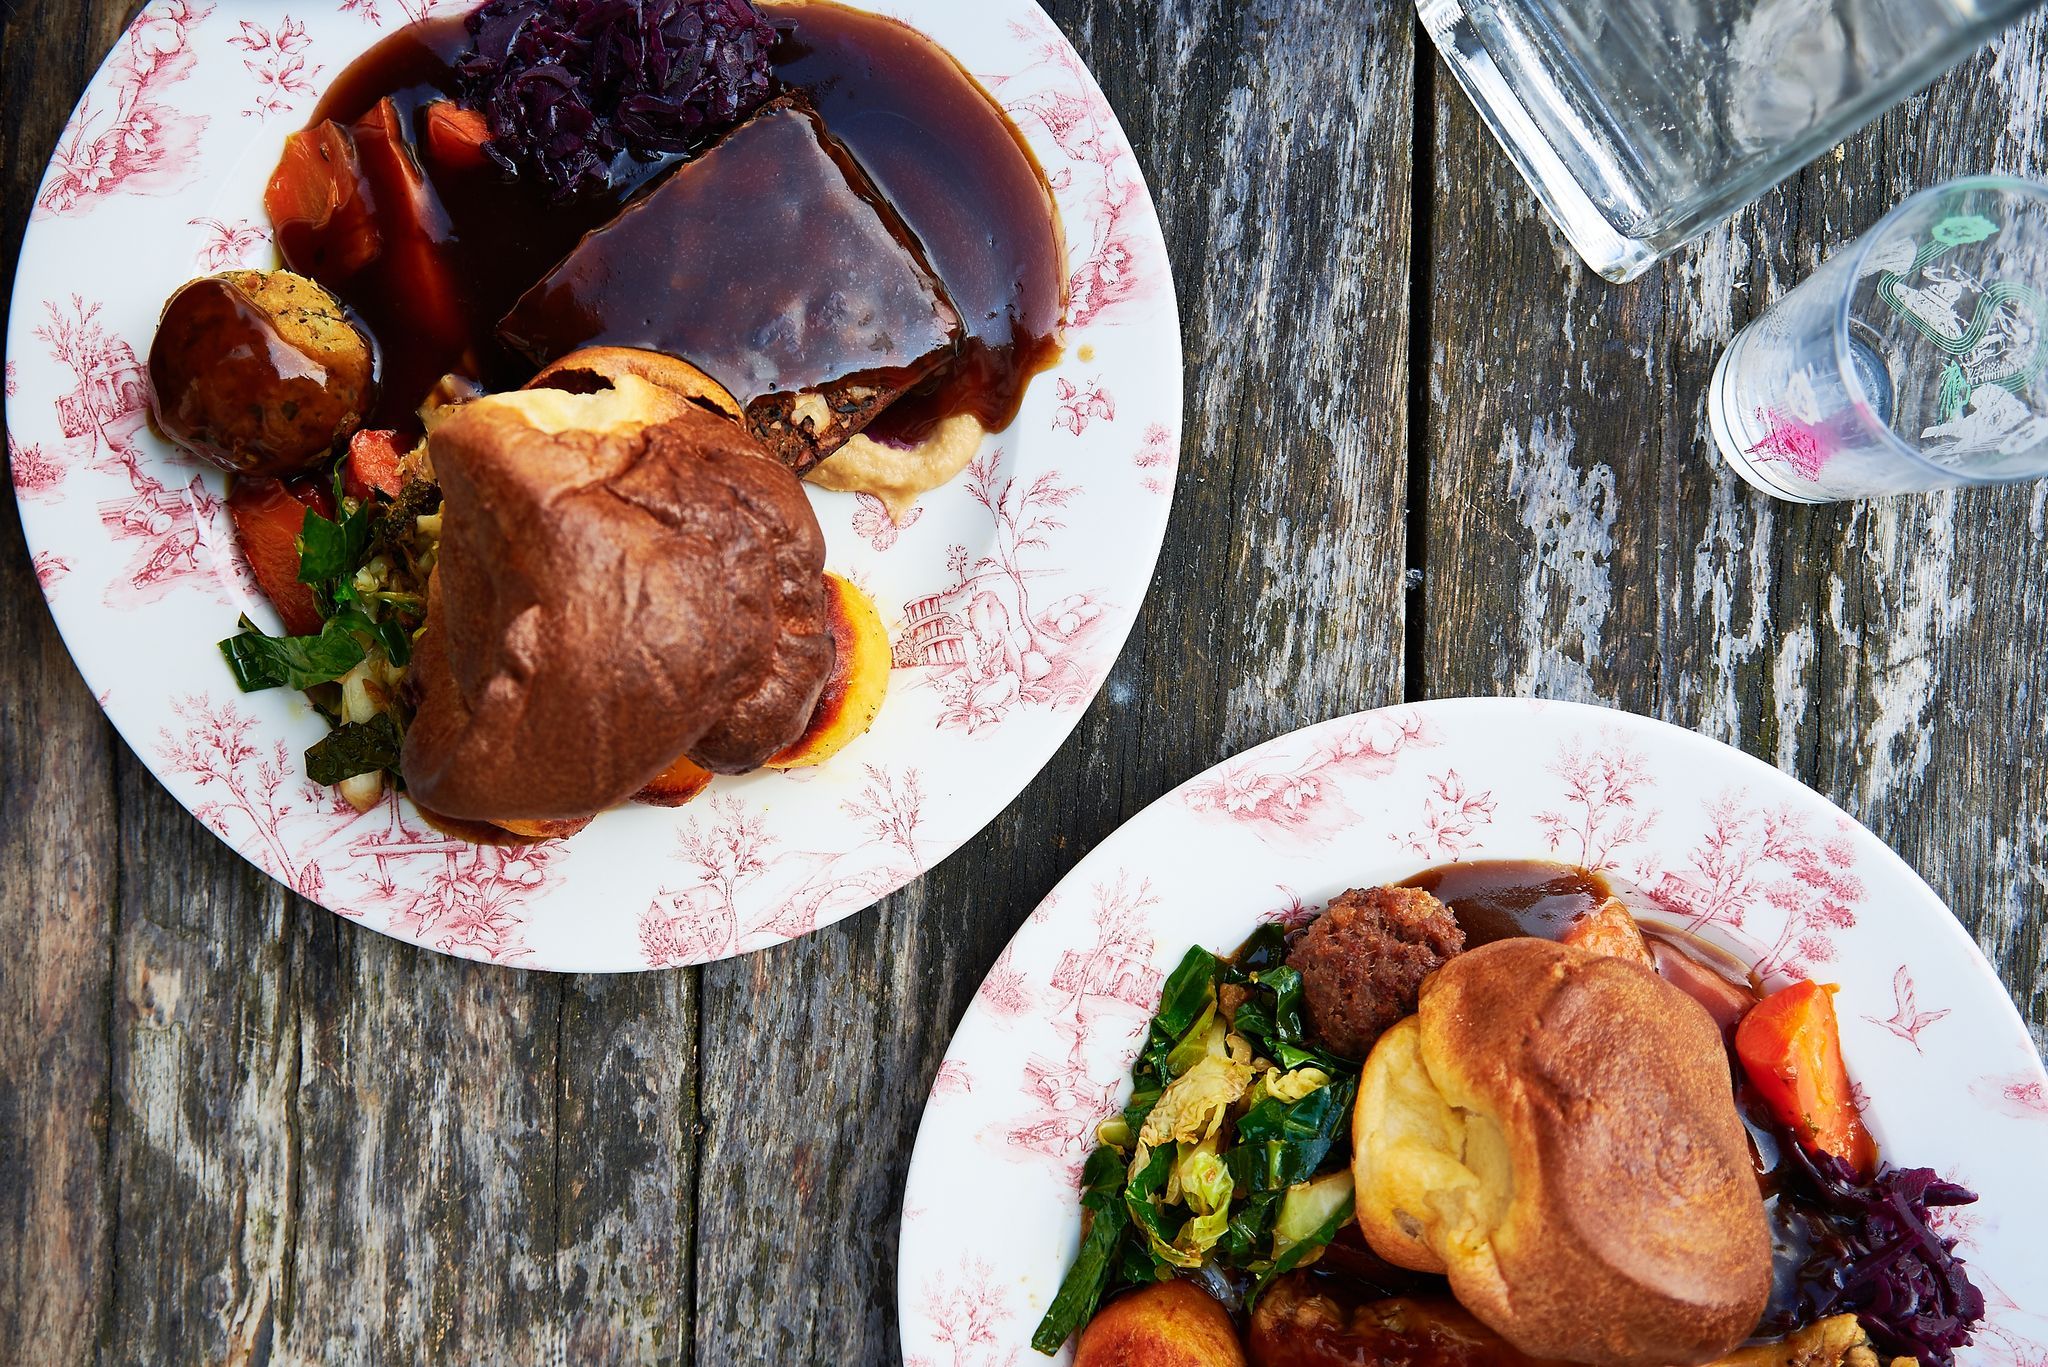 over head shot of the two delicious looking sunday roast